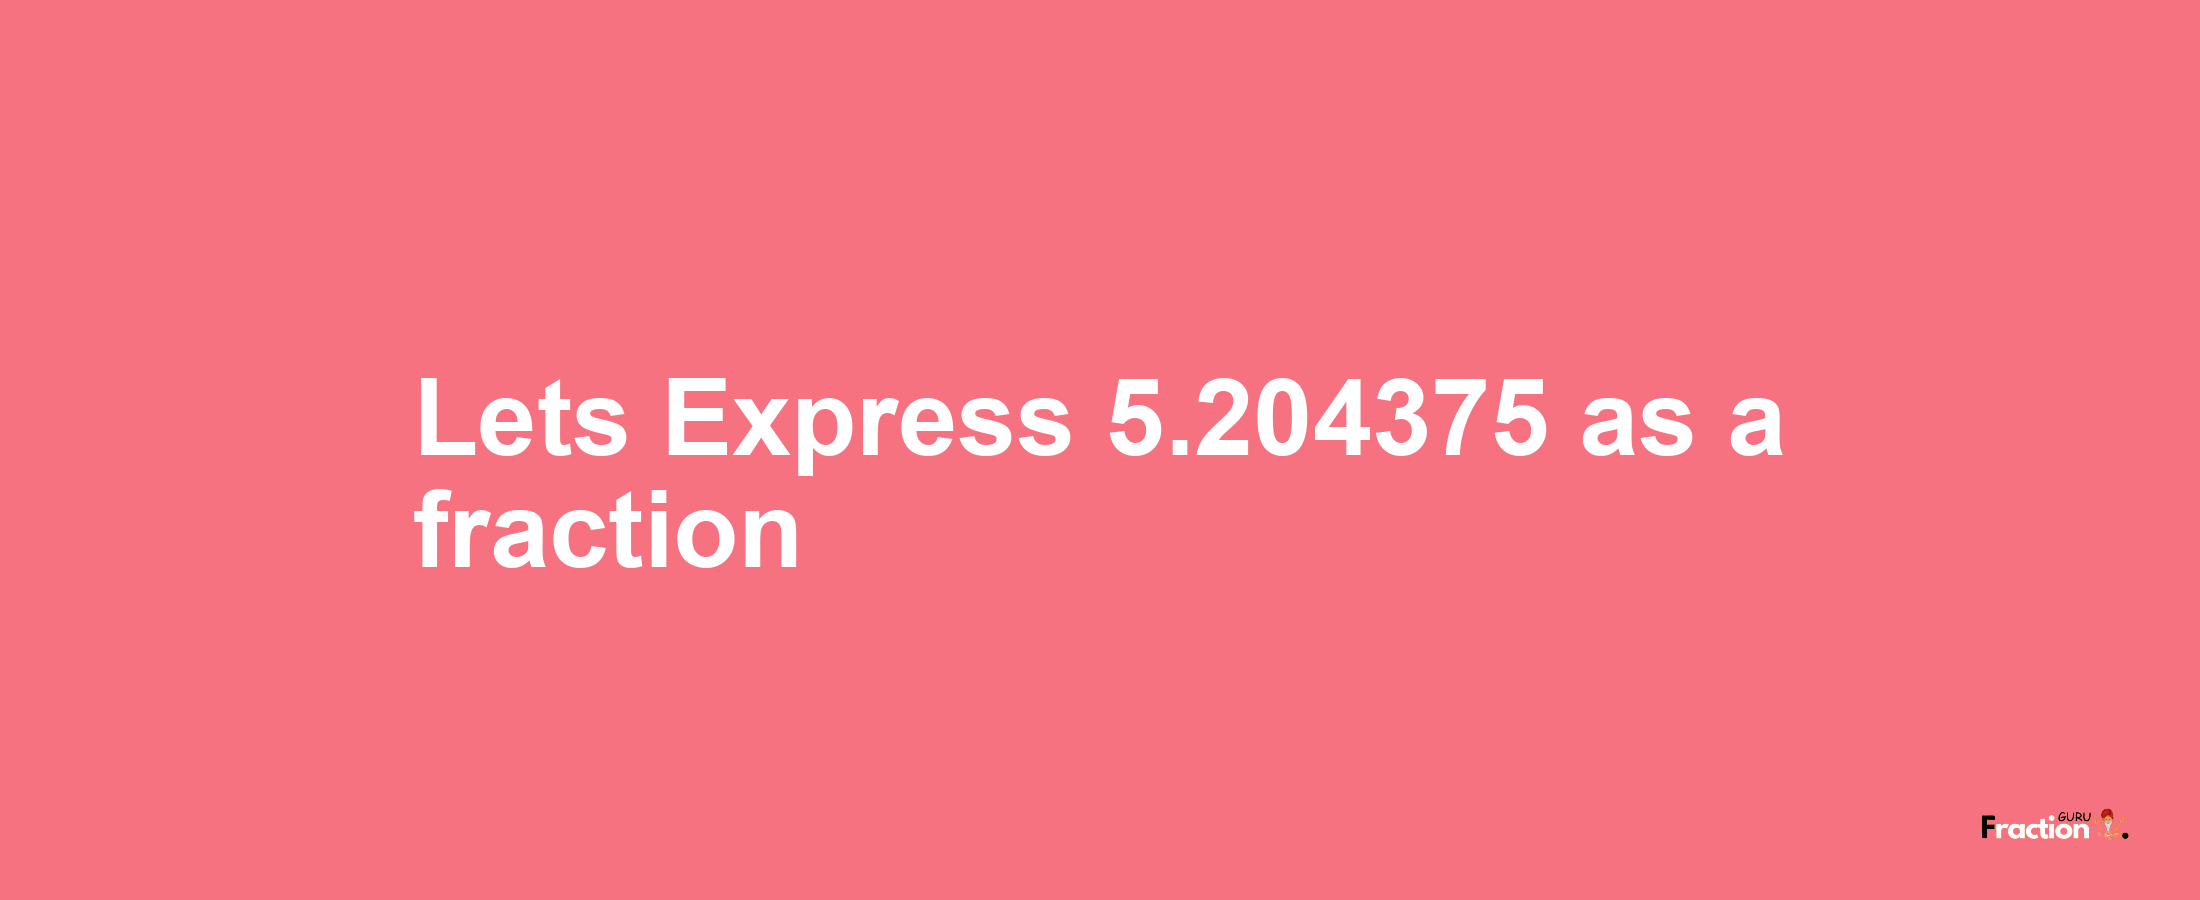 Lets Express 5.204375 as afraction